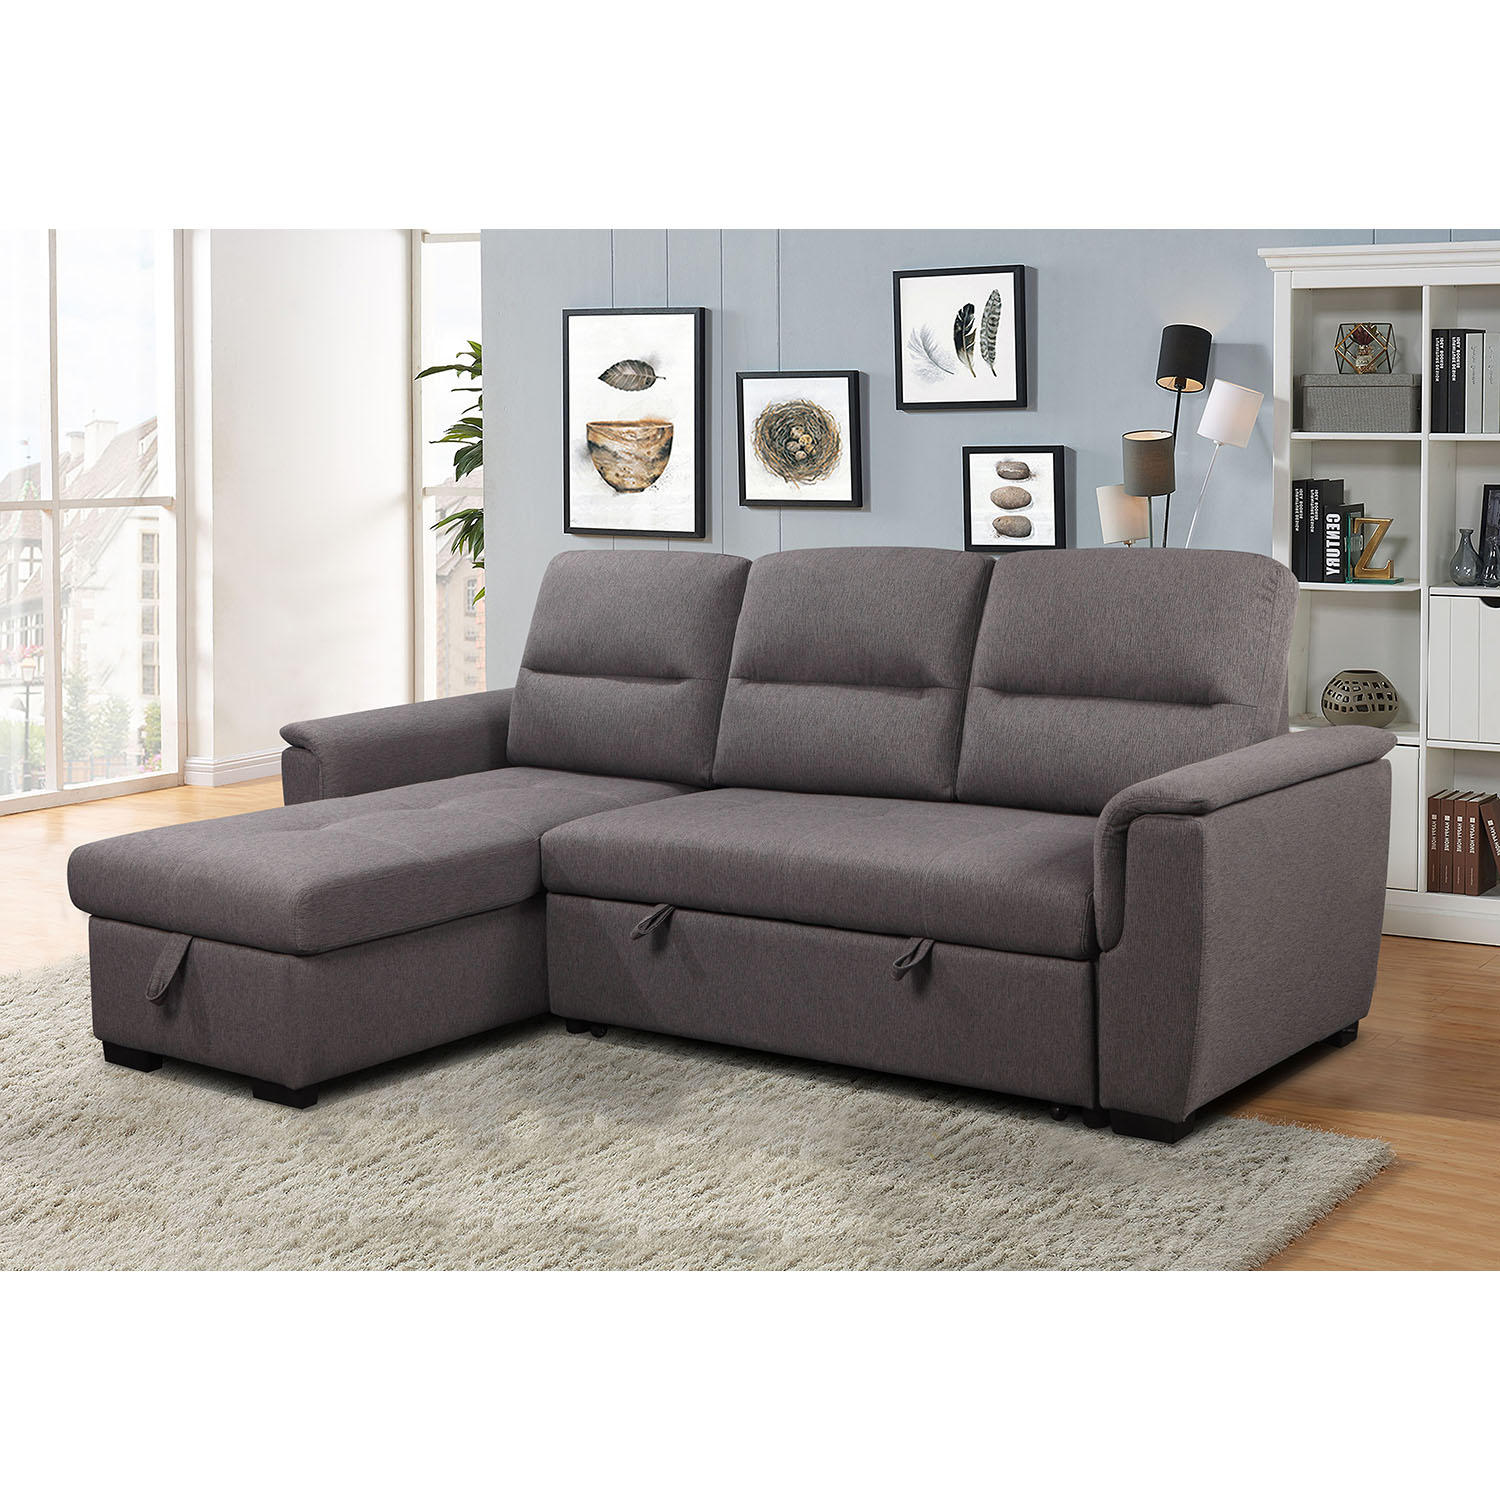 Abbyson Living Dakota Reversible Storage Sectional with Pullout Bed